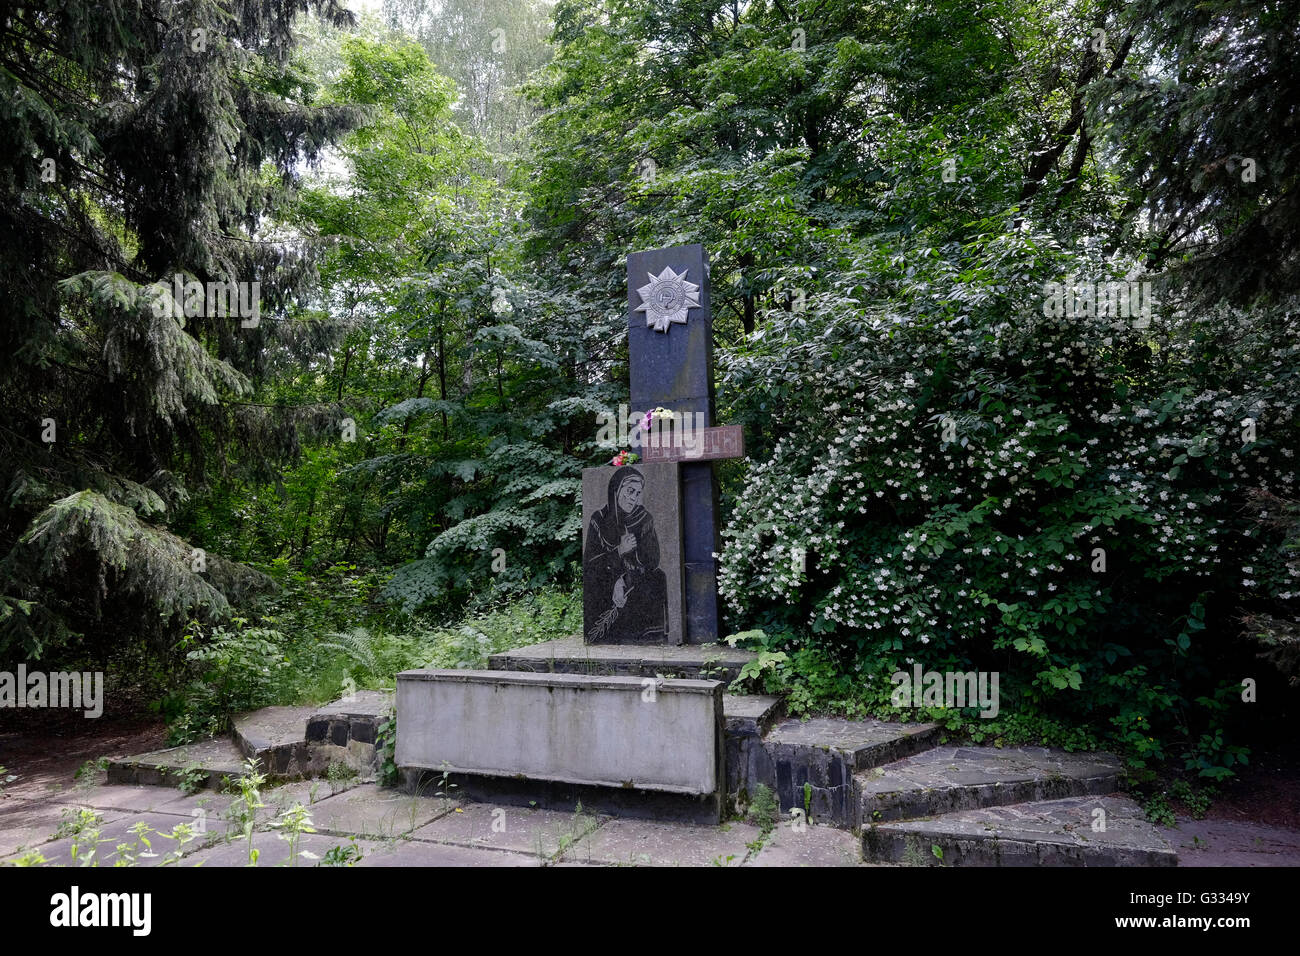 A memorial to WW2 victims in the deserted village of Zalissya located inside the Chernobyl Exclusion Zone in Ukraine on 04 June 2016. The Chernobyl accident occurred on 26 April 1986 at the Chernobyl Nuclear Power Plant in the city of Pripyat and was the worst nuclear power plant accident in history in terms of cost and casualties. Stock Photo